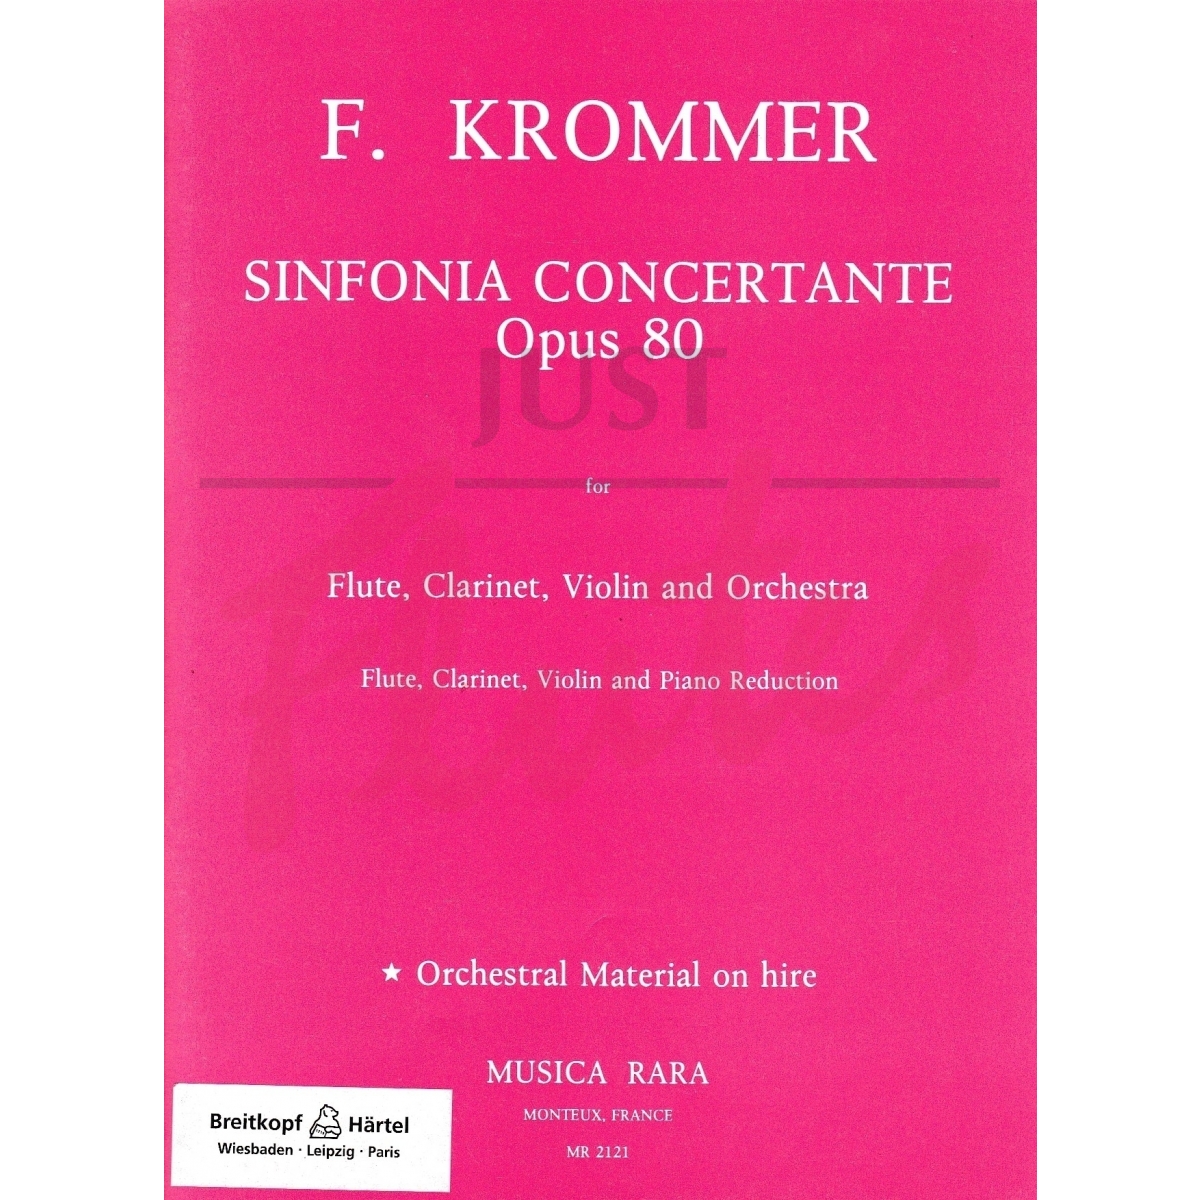 Sinfonia Concertante in D major for Flute, Clarinet, Violin with piano reduction